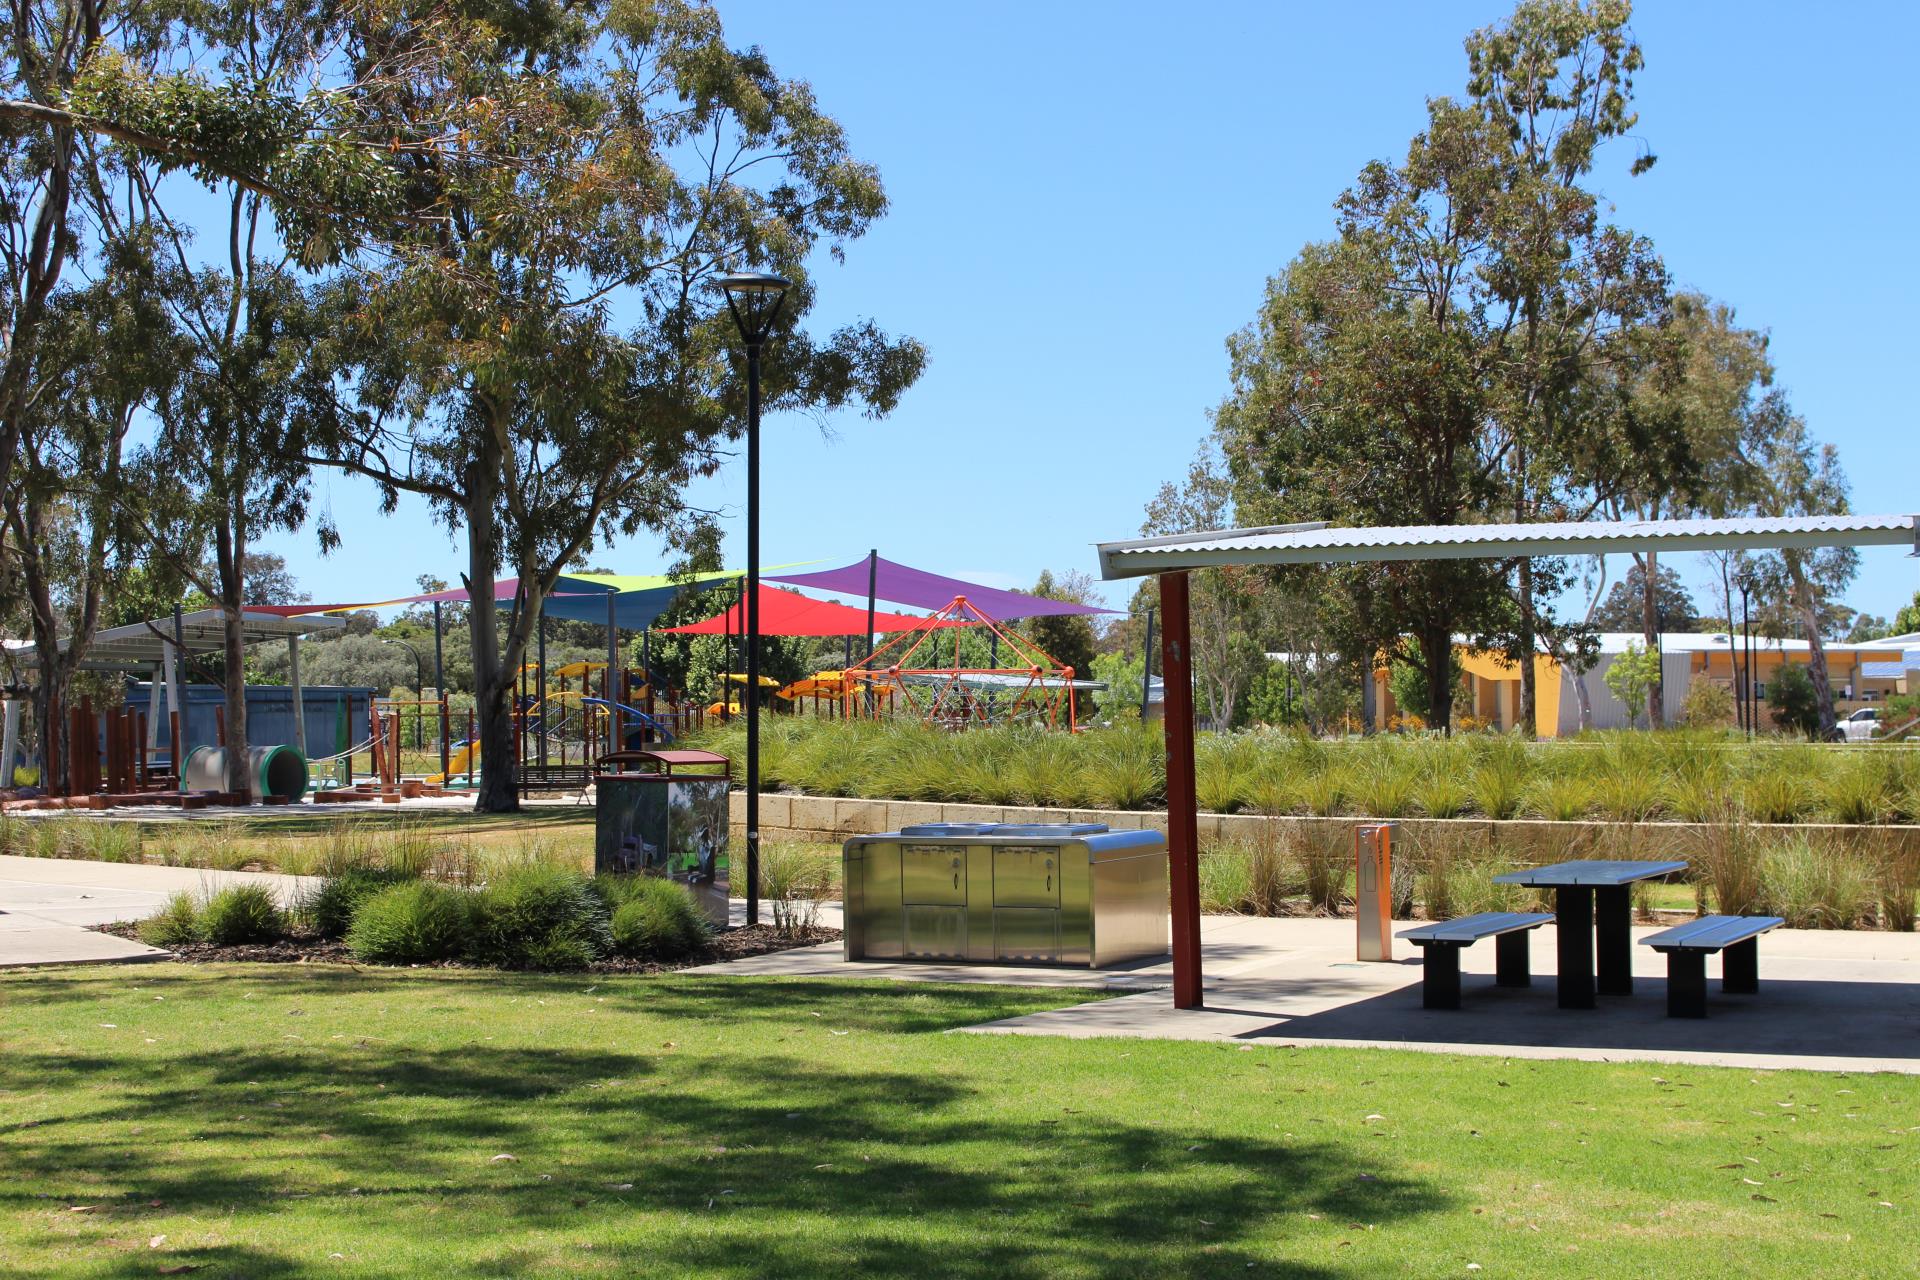 Park with BBQ's and shade sails